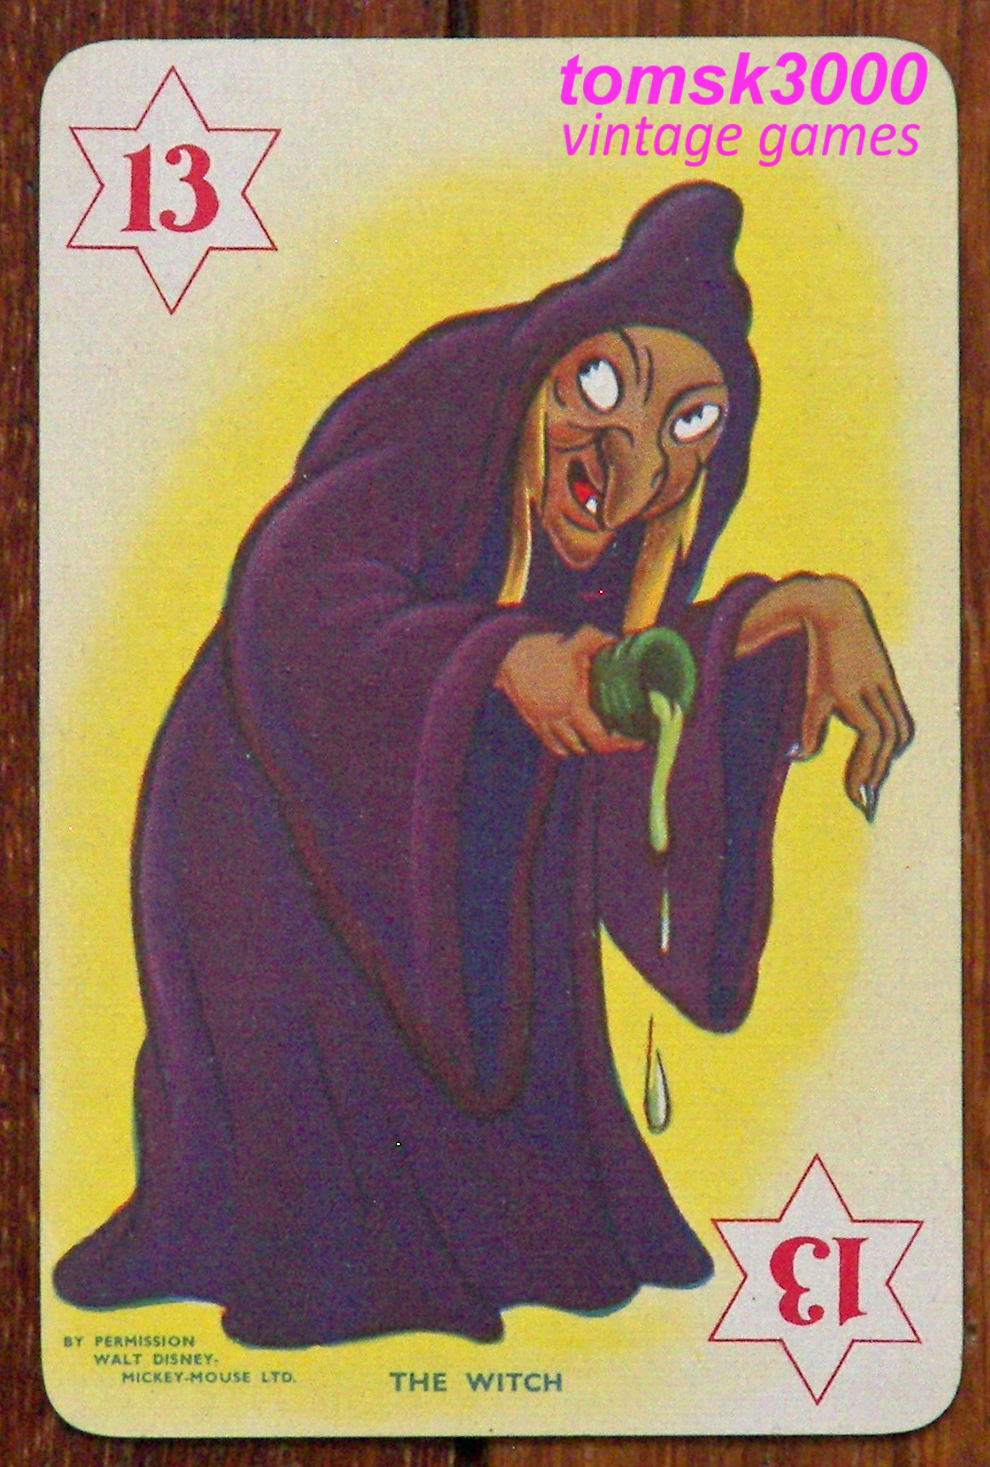 Filmic Light - Snow White Archive: Snow White Pepys Card Game by Castell,  1937-38